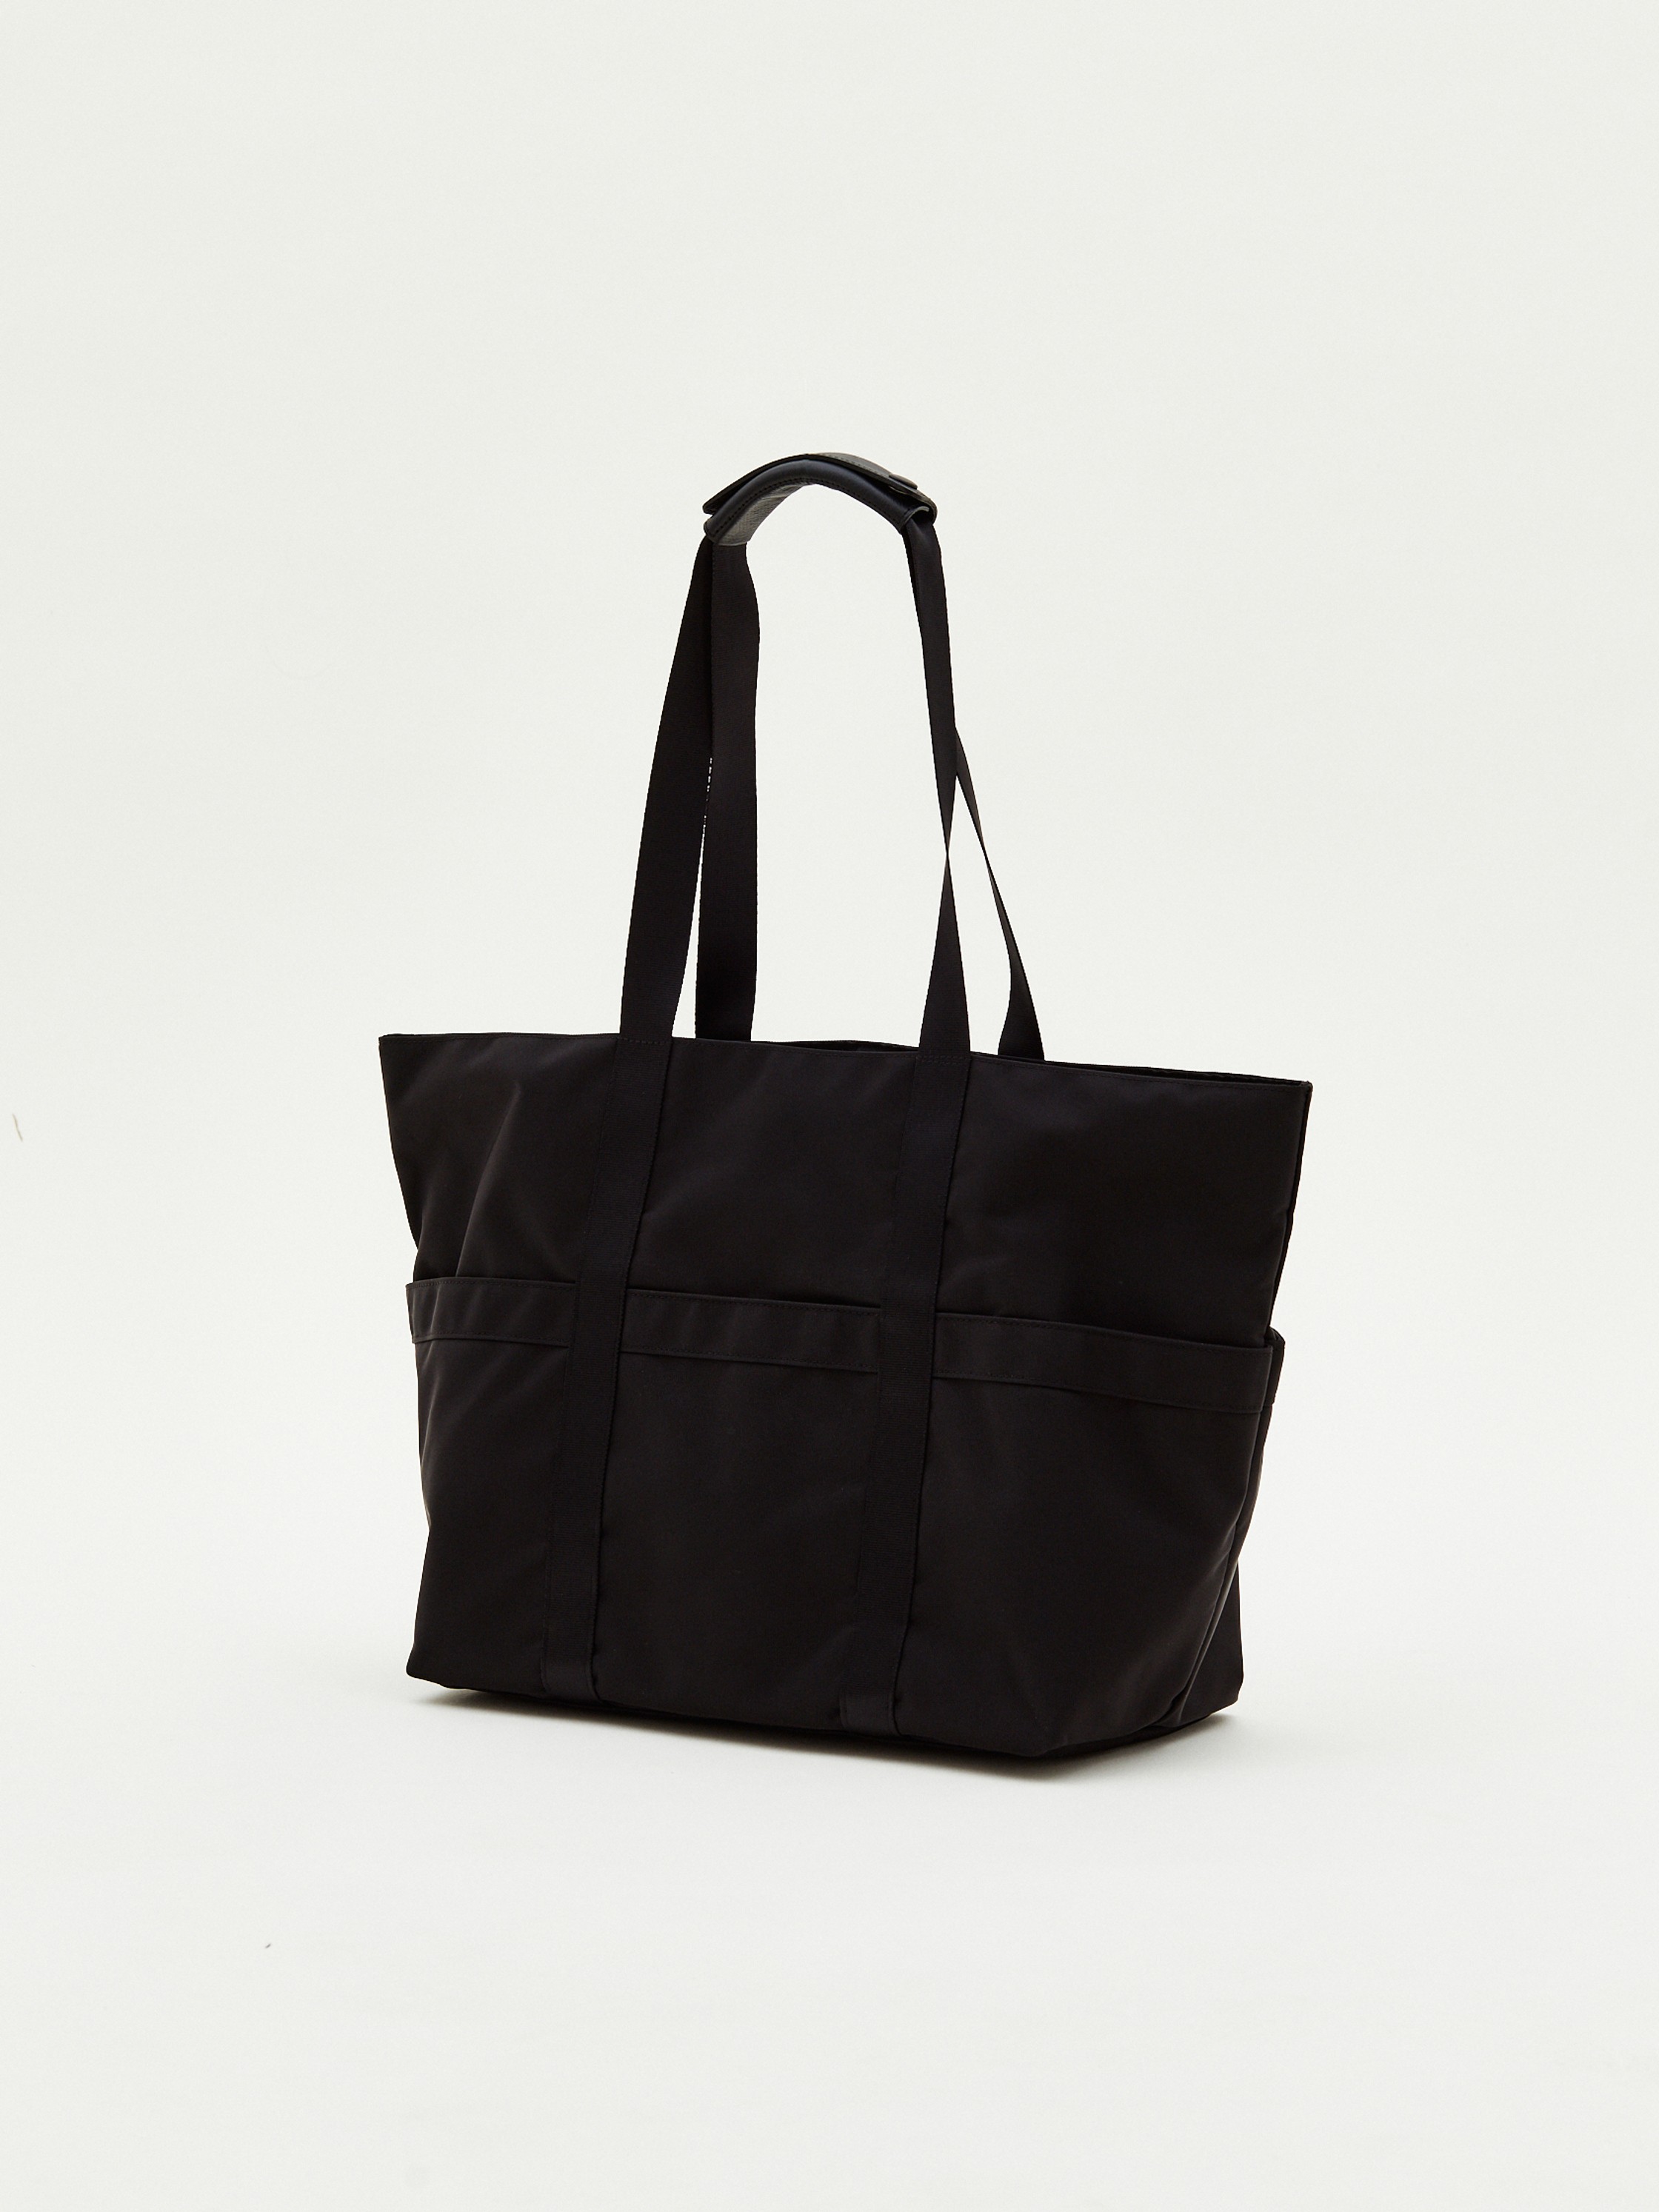 Trolly tote with pouch - Monocle - Bags - Shop | Monocle